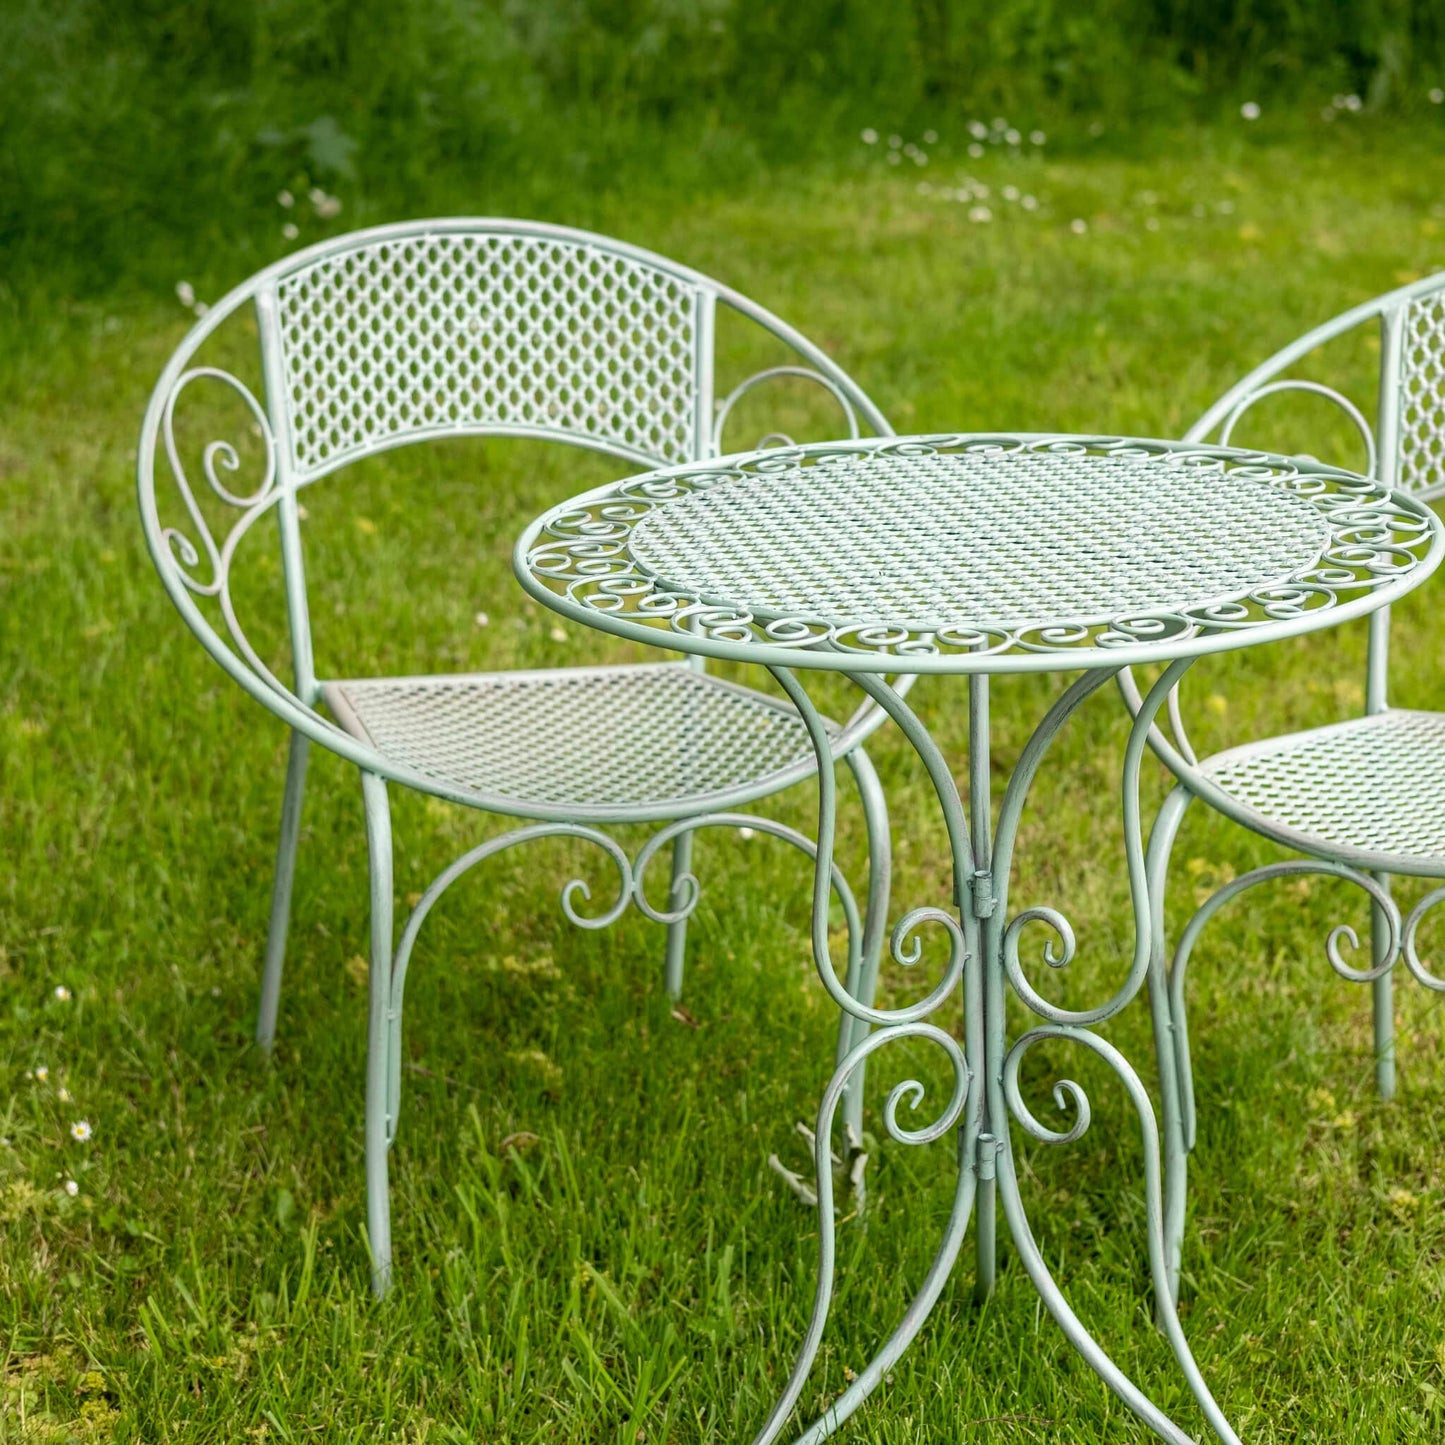 Aquitaine Mesh 3 Piece Bistro Set in Sage Green by Ascalon - Mouse & Manor